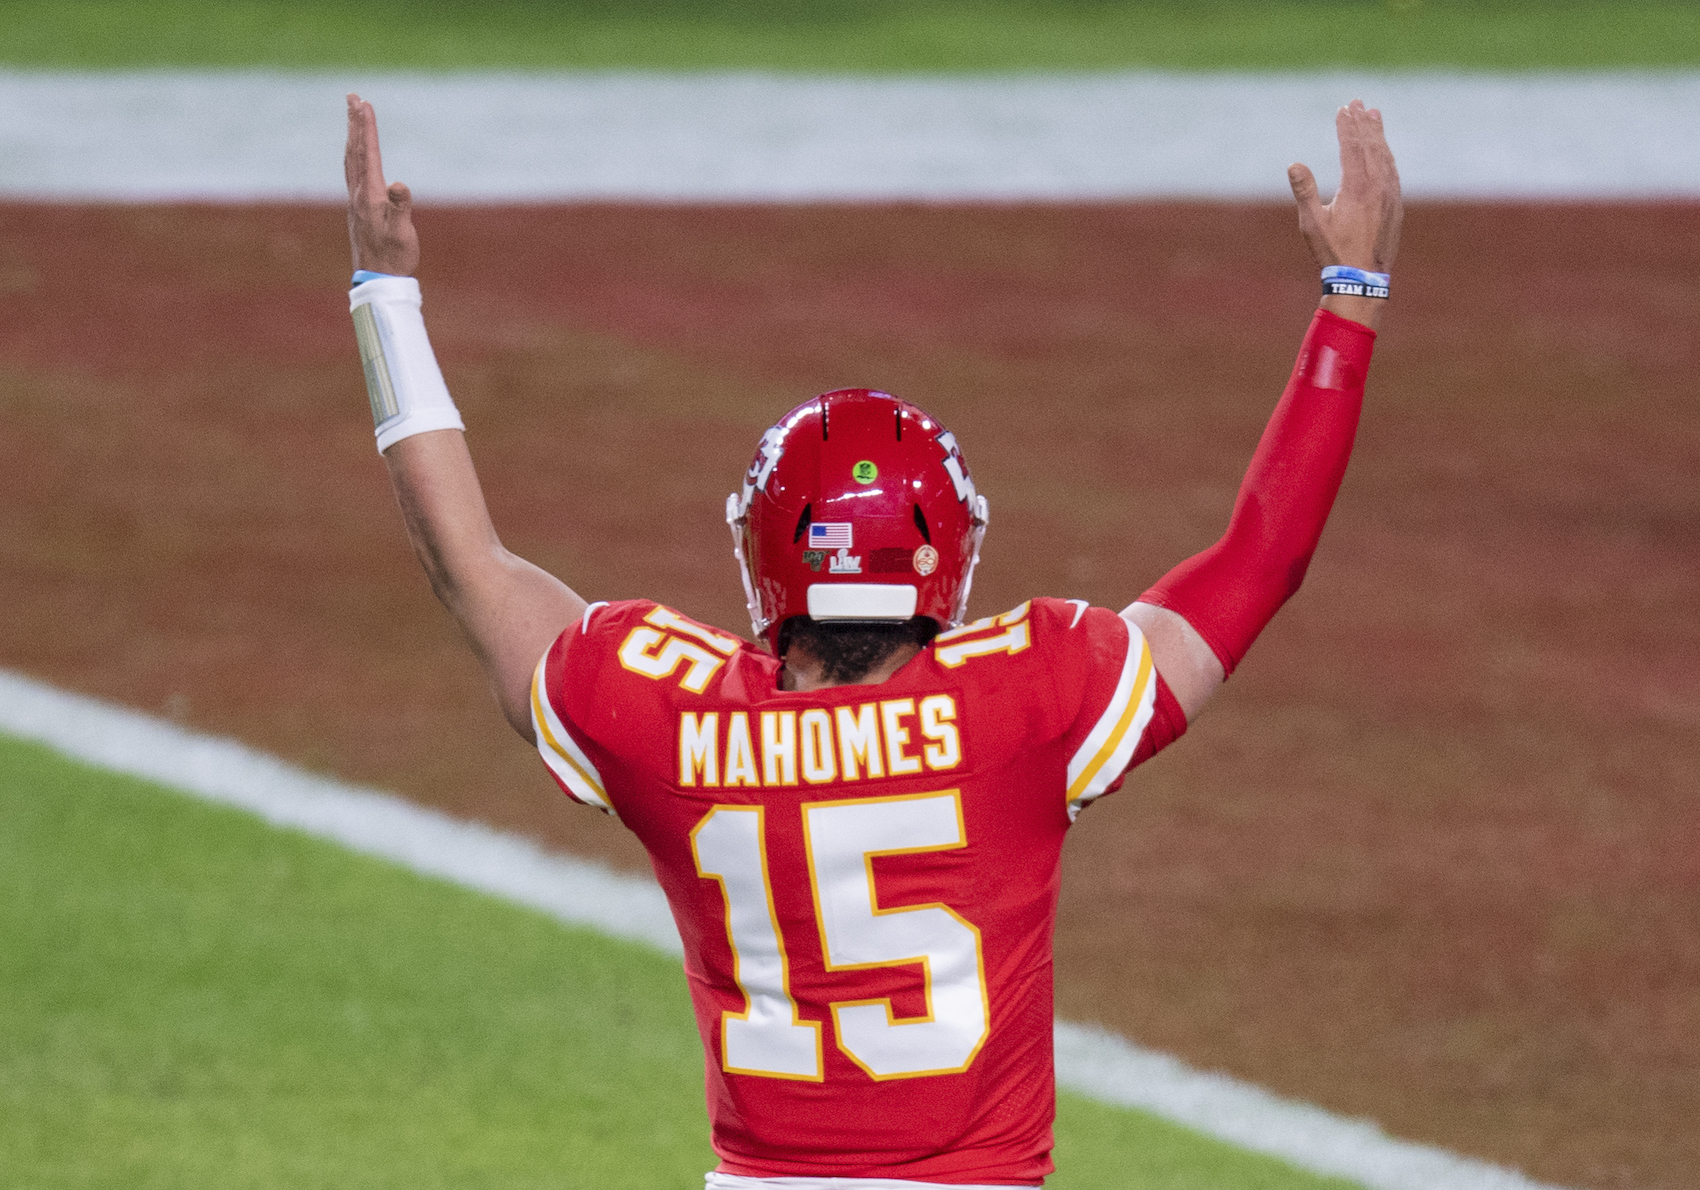 The Kansas City Chiefs locked up Patrick Mahomes for 10 more years, but the team will soon regret breaking the bank for their franchise QB.